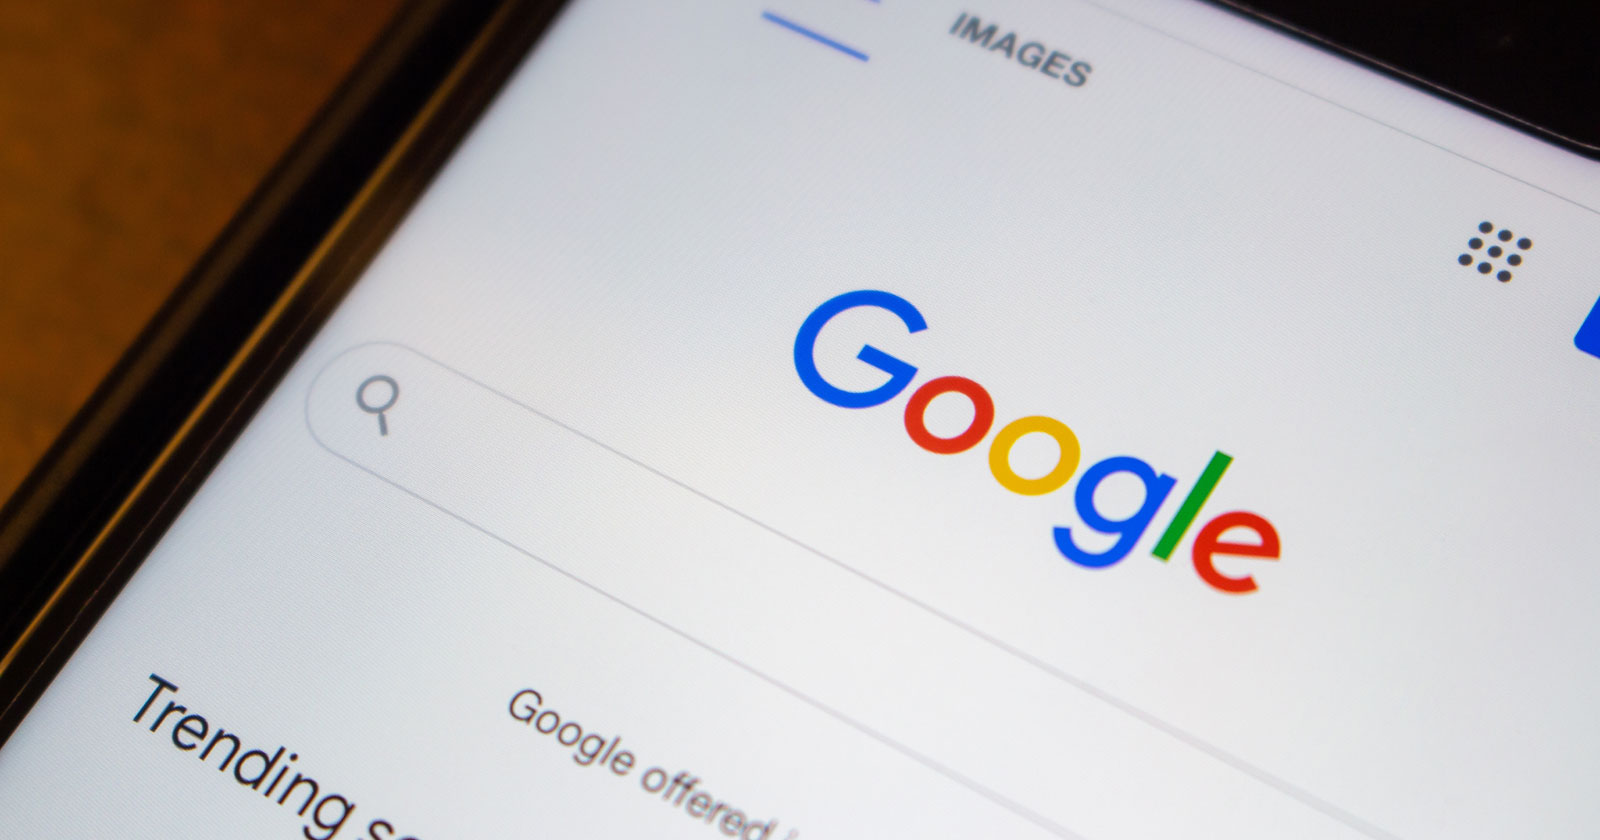 Google ends support for Video Carousel structured data and associated rich results